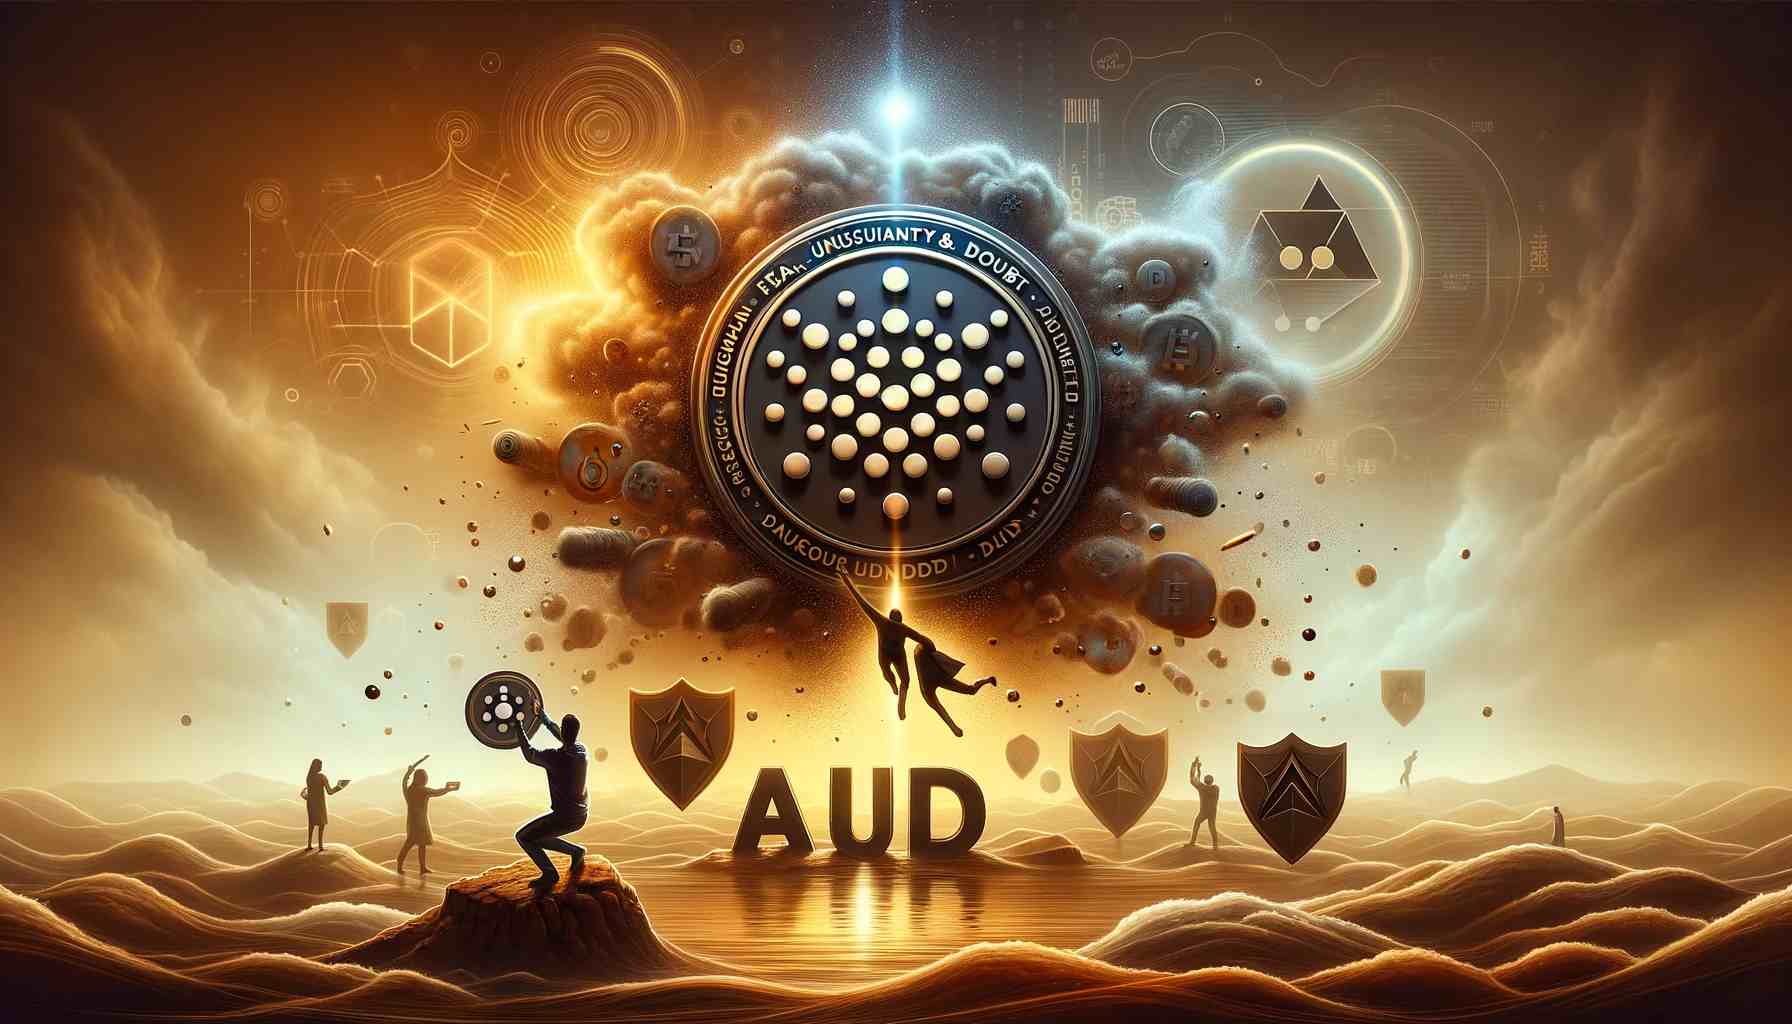 ‘And that’s why ADA is…’ – Exploring the FUD around Cardano